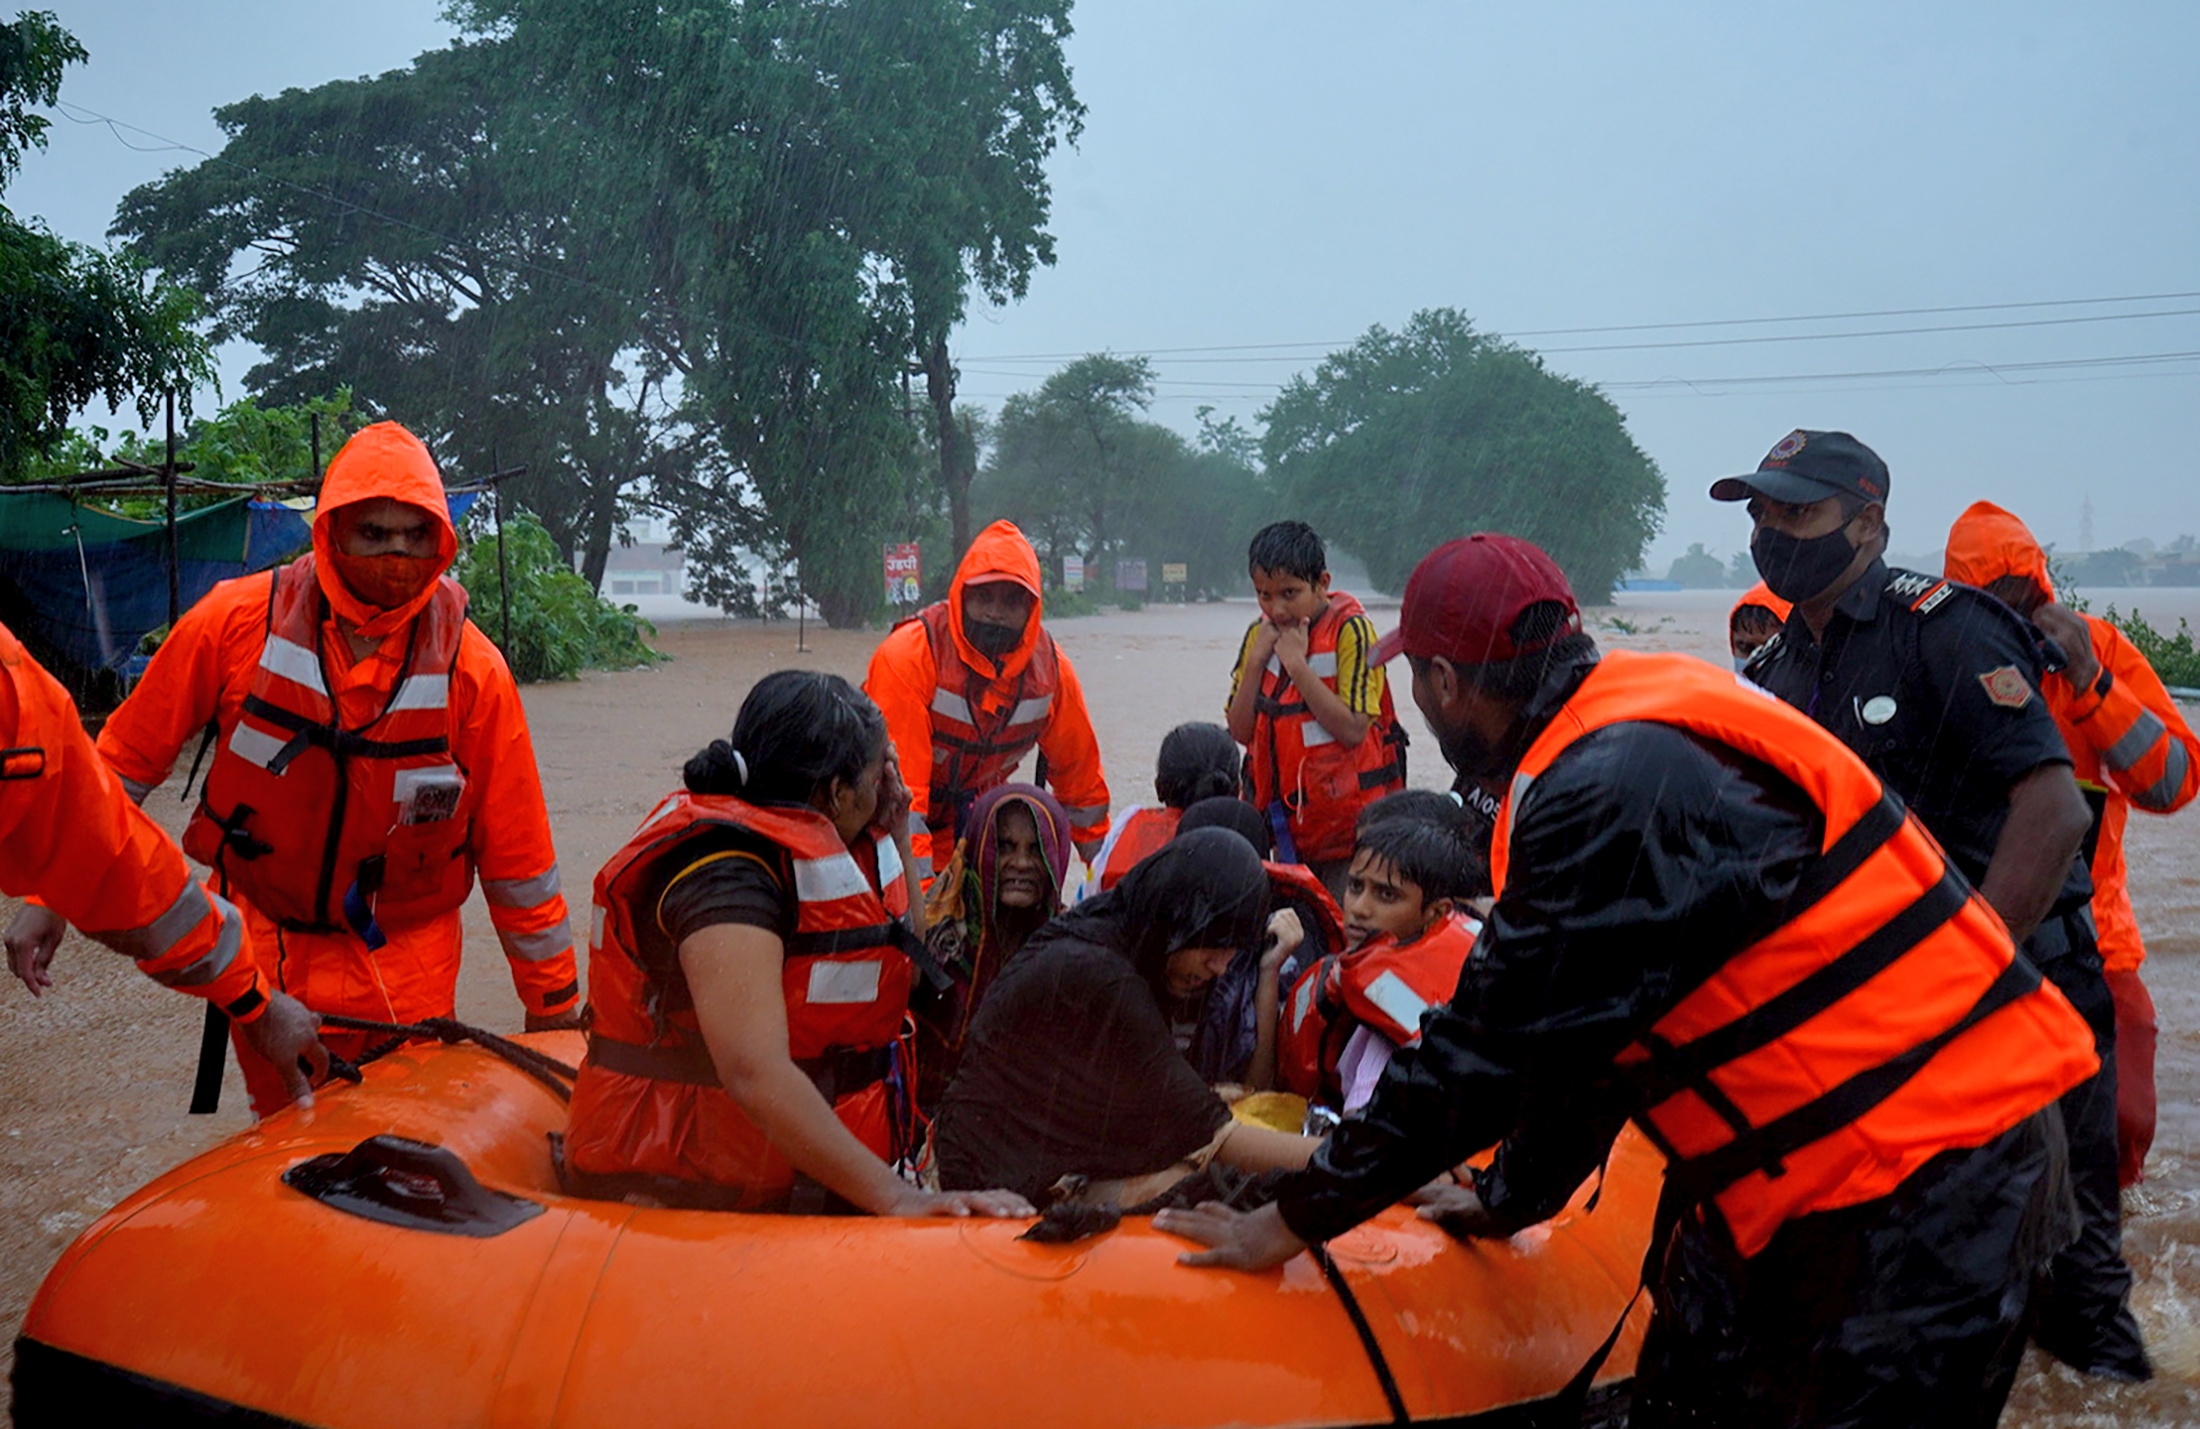 Rescue workers evacuate people from a flooded area to safer places after heavy rains in Kolhapur in the western state of Maharashtra, India, July 23, 2021. REUTERS/Abhijeet Gurjar